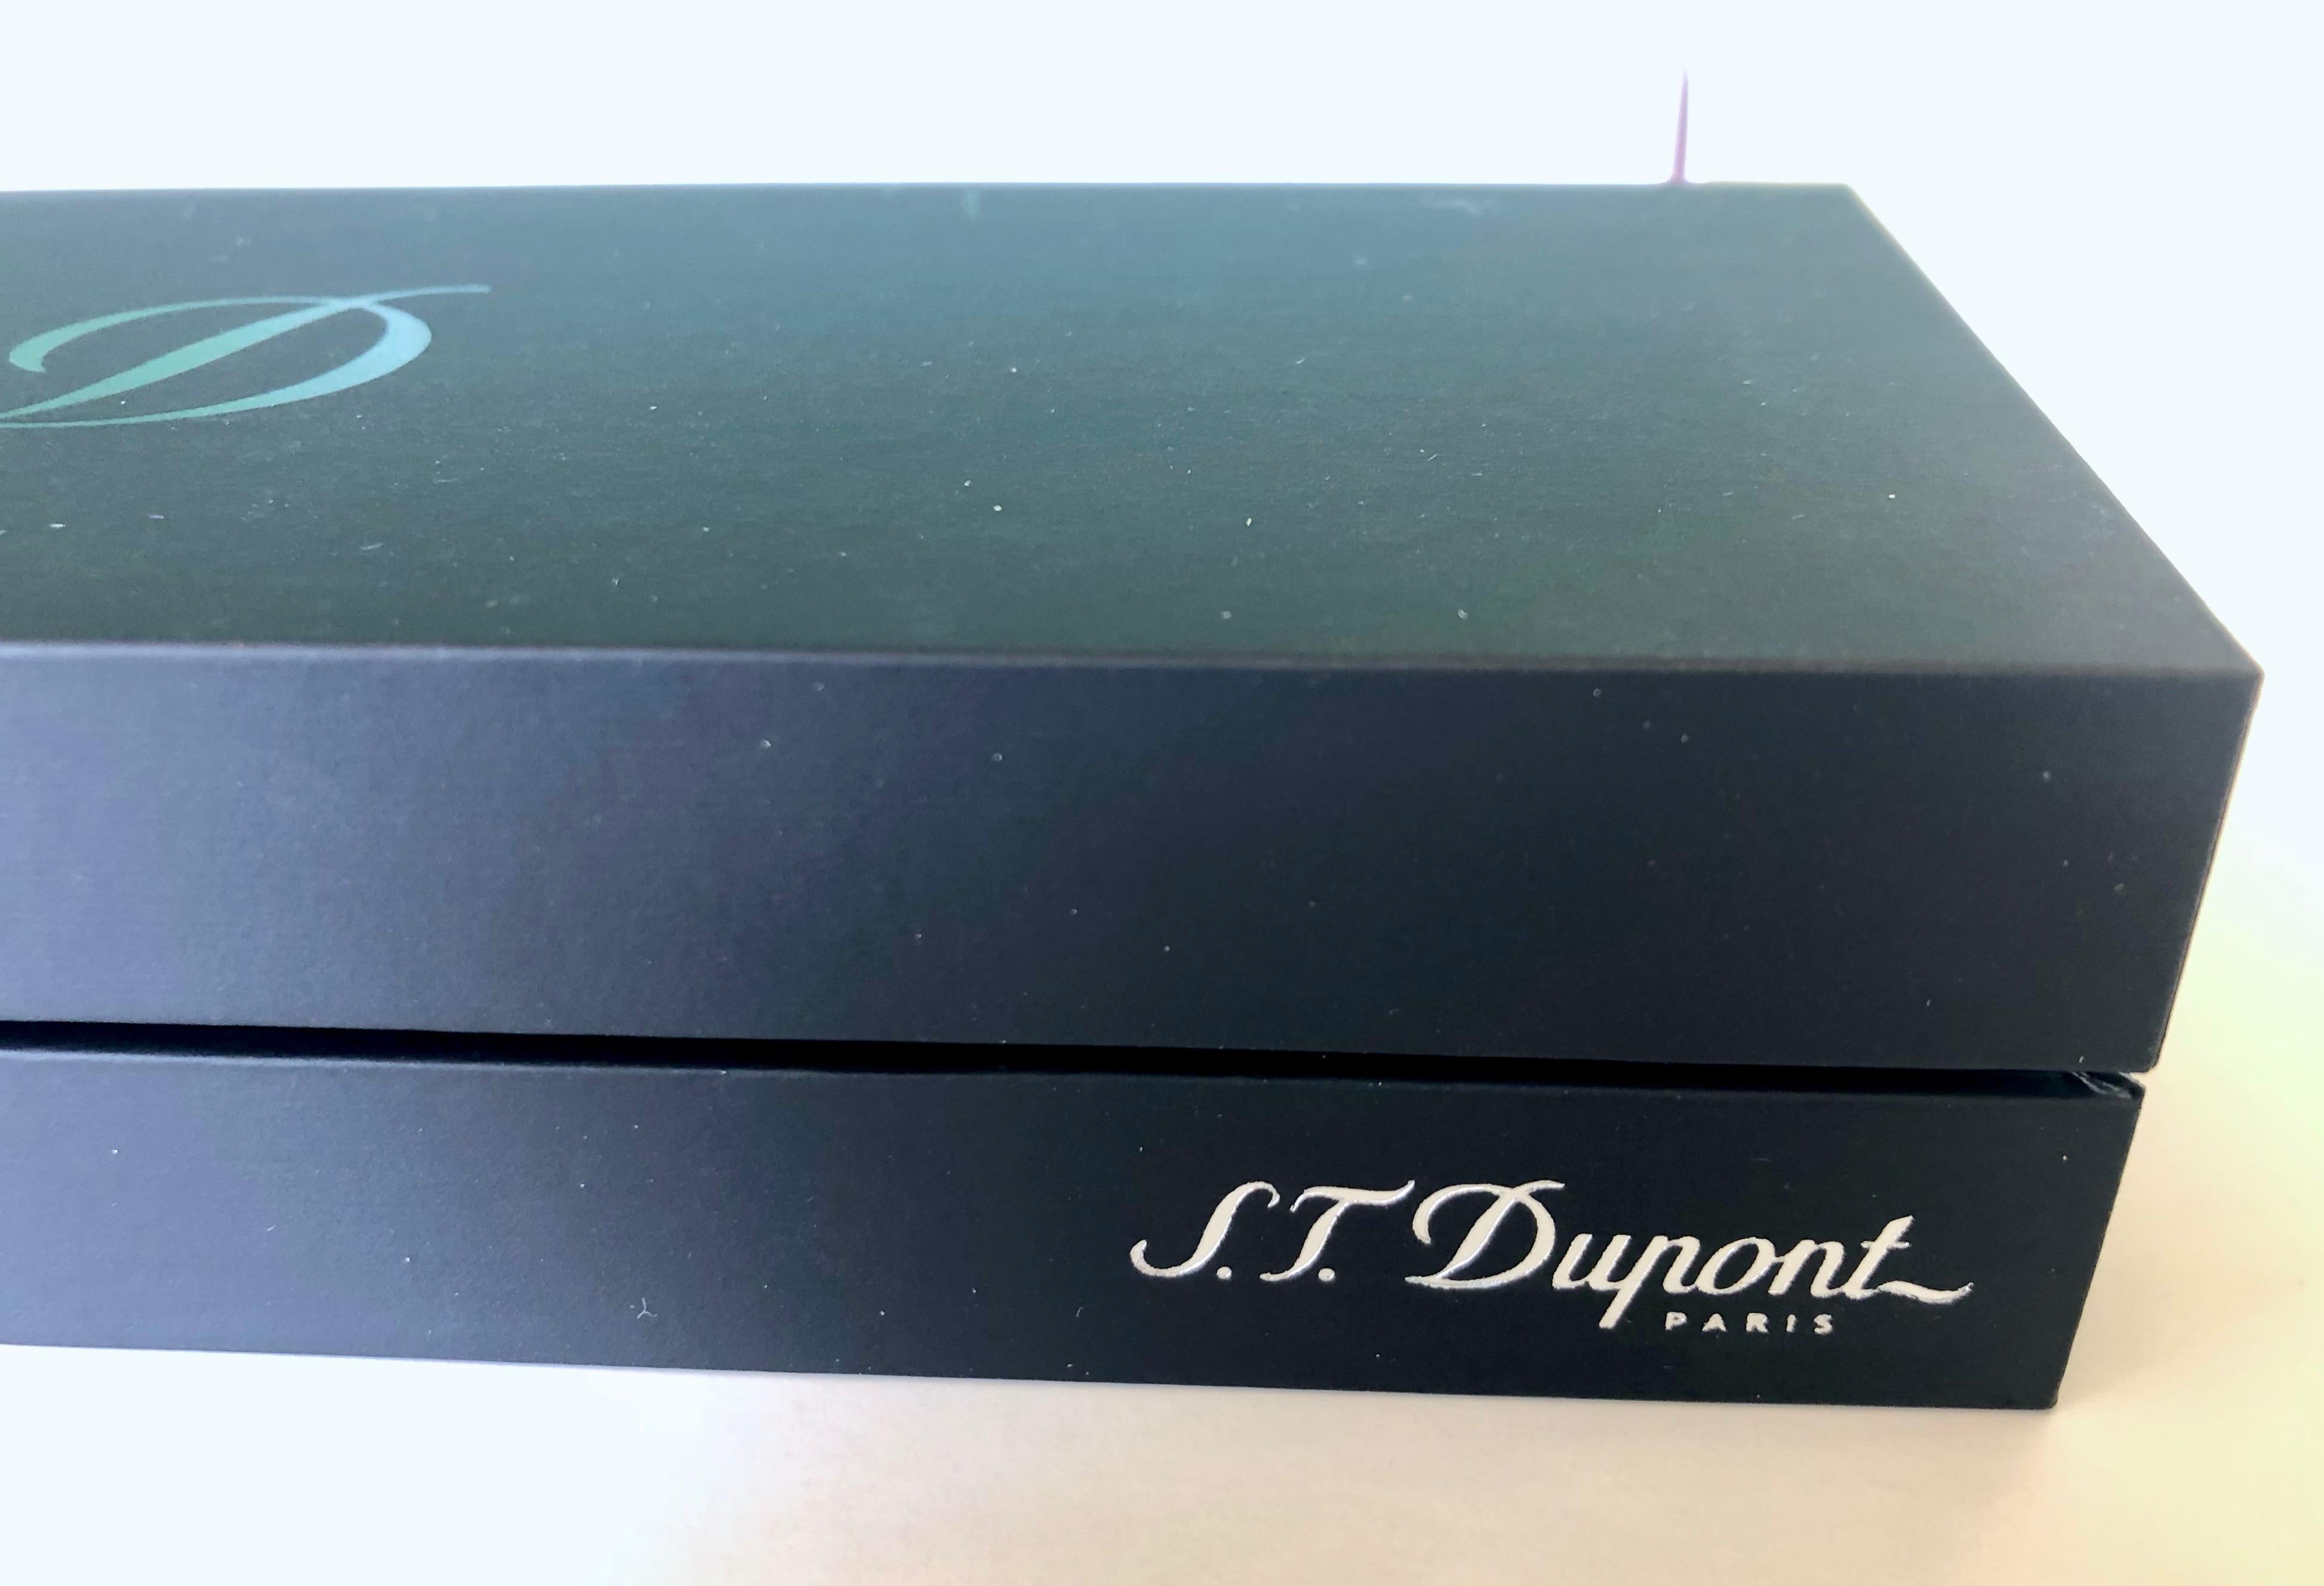 S.T. Dupont Paris Olympio Brand New Large Solid Silver Ball Point Pen in Box For Sale 1